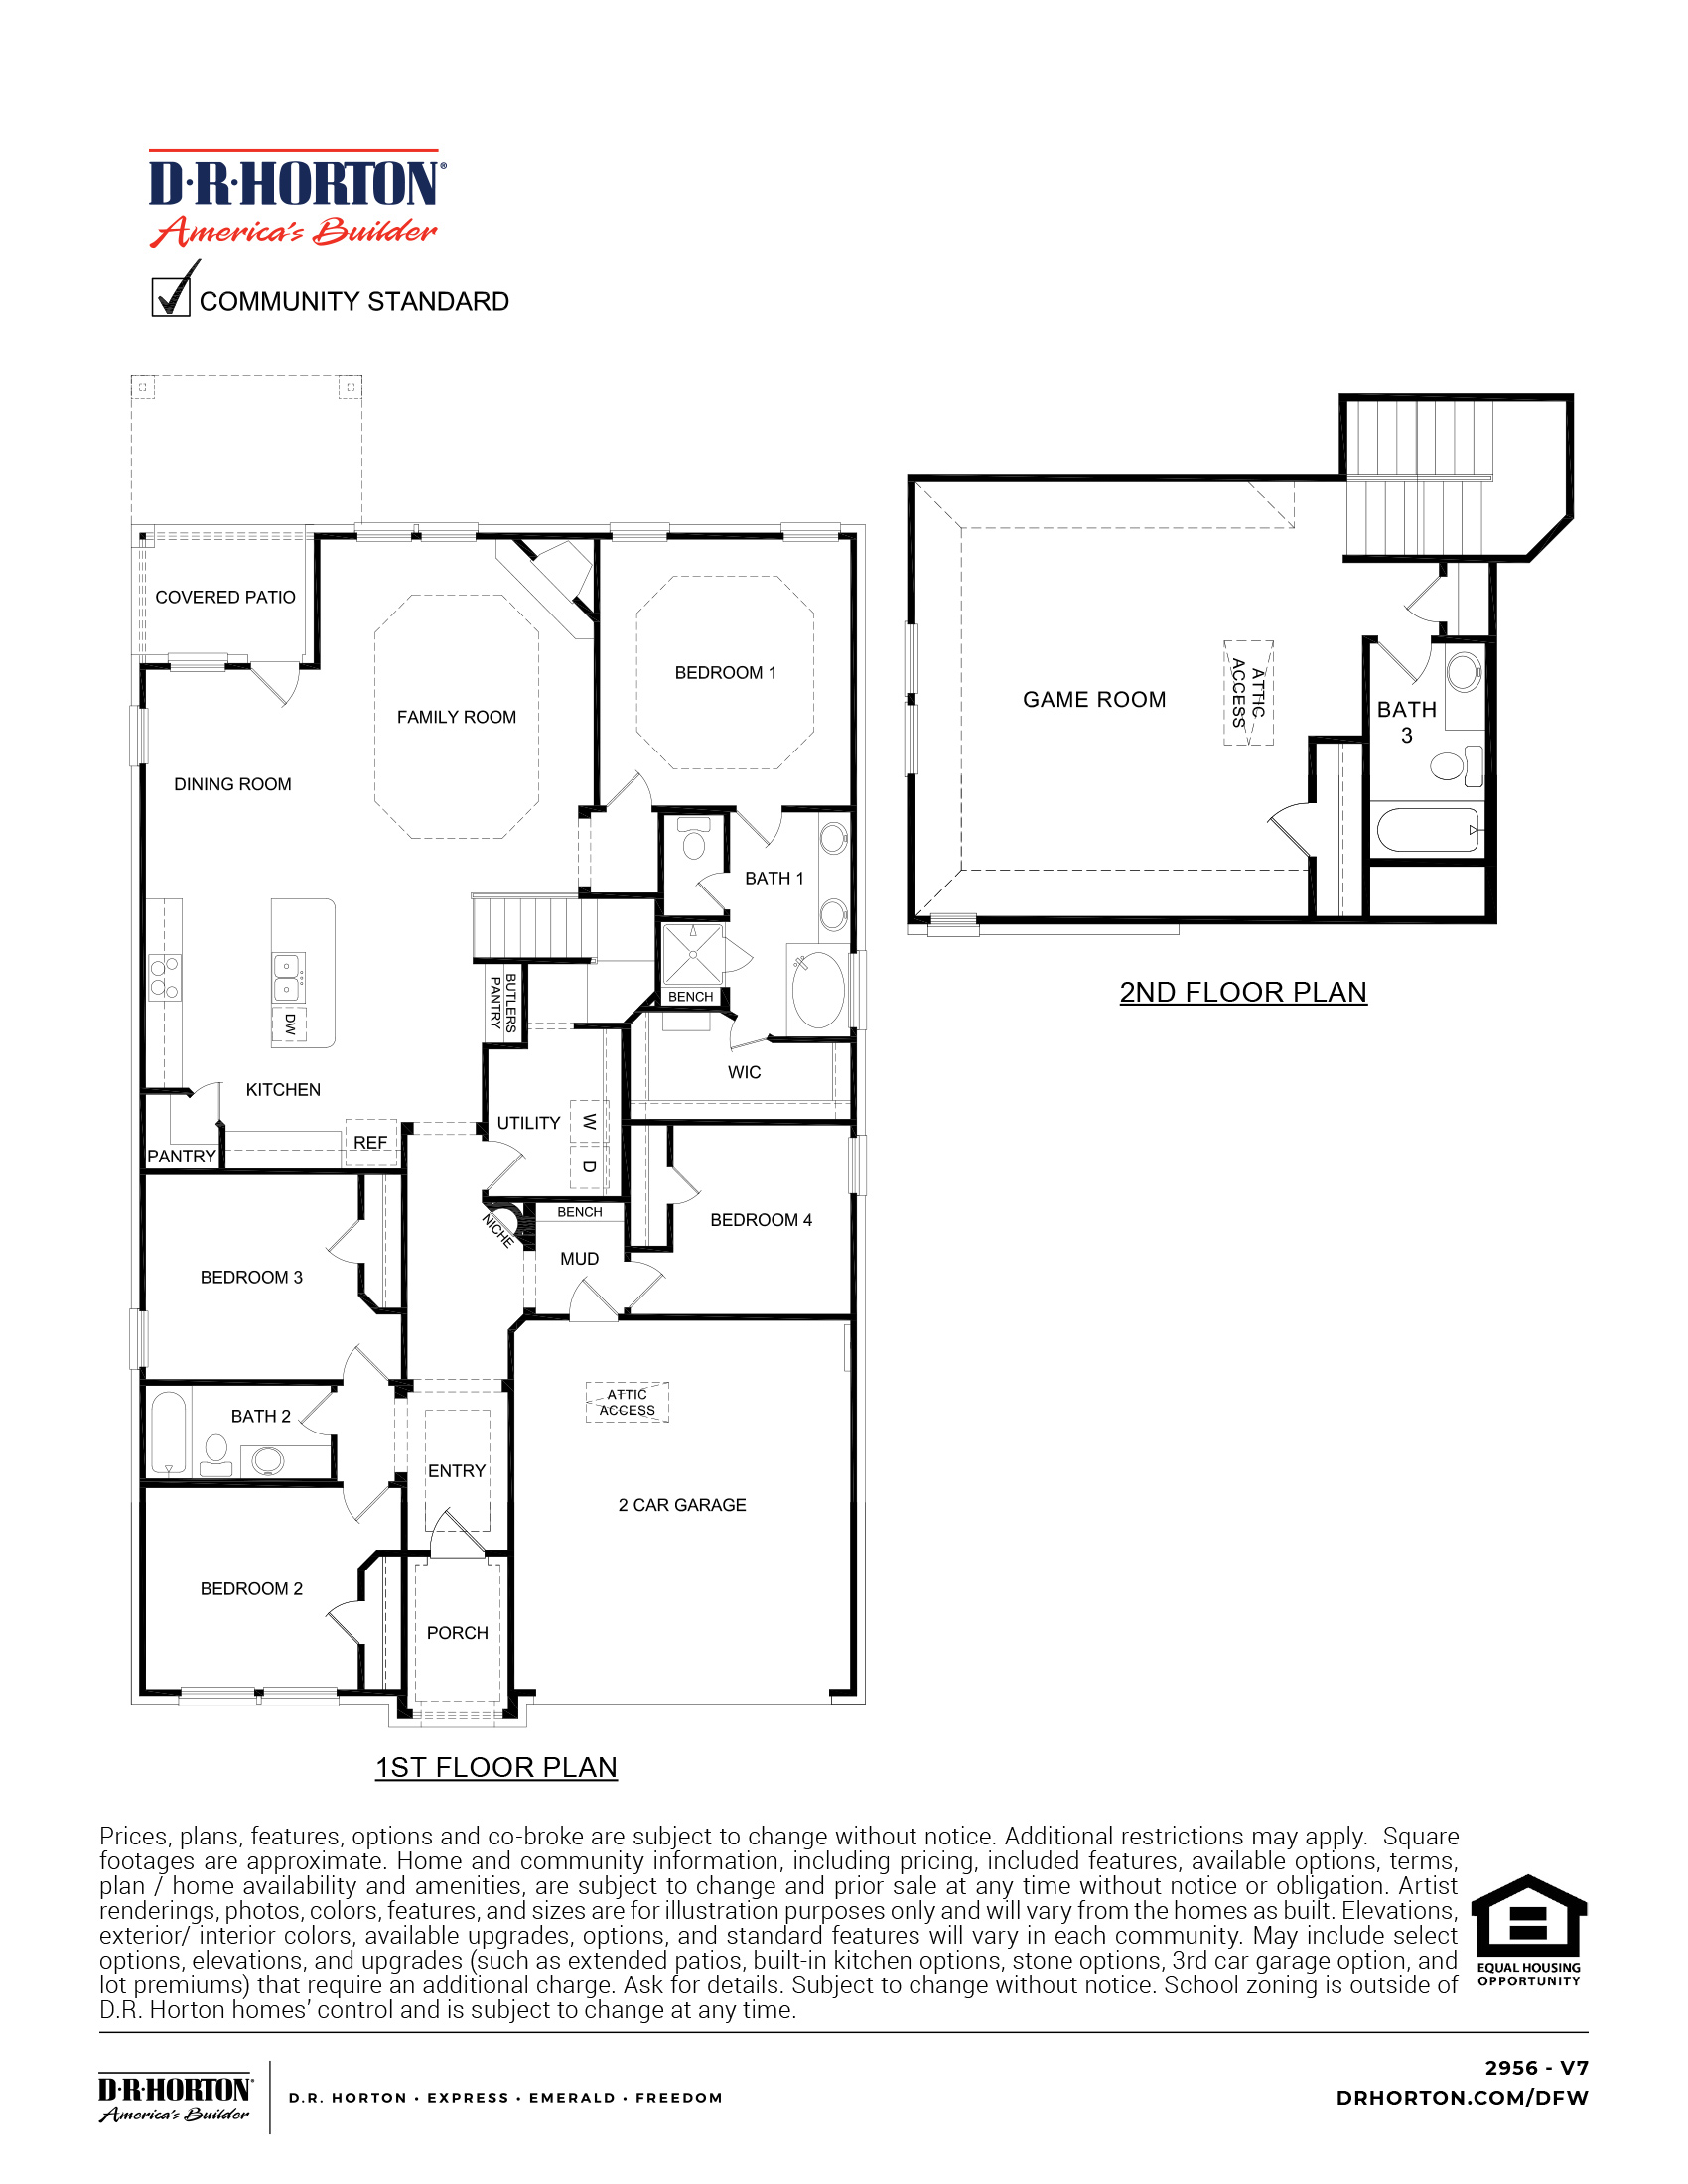 2956 Ivery floorplan rendering - the Woods at Lindsey Place in Anna TX